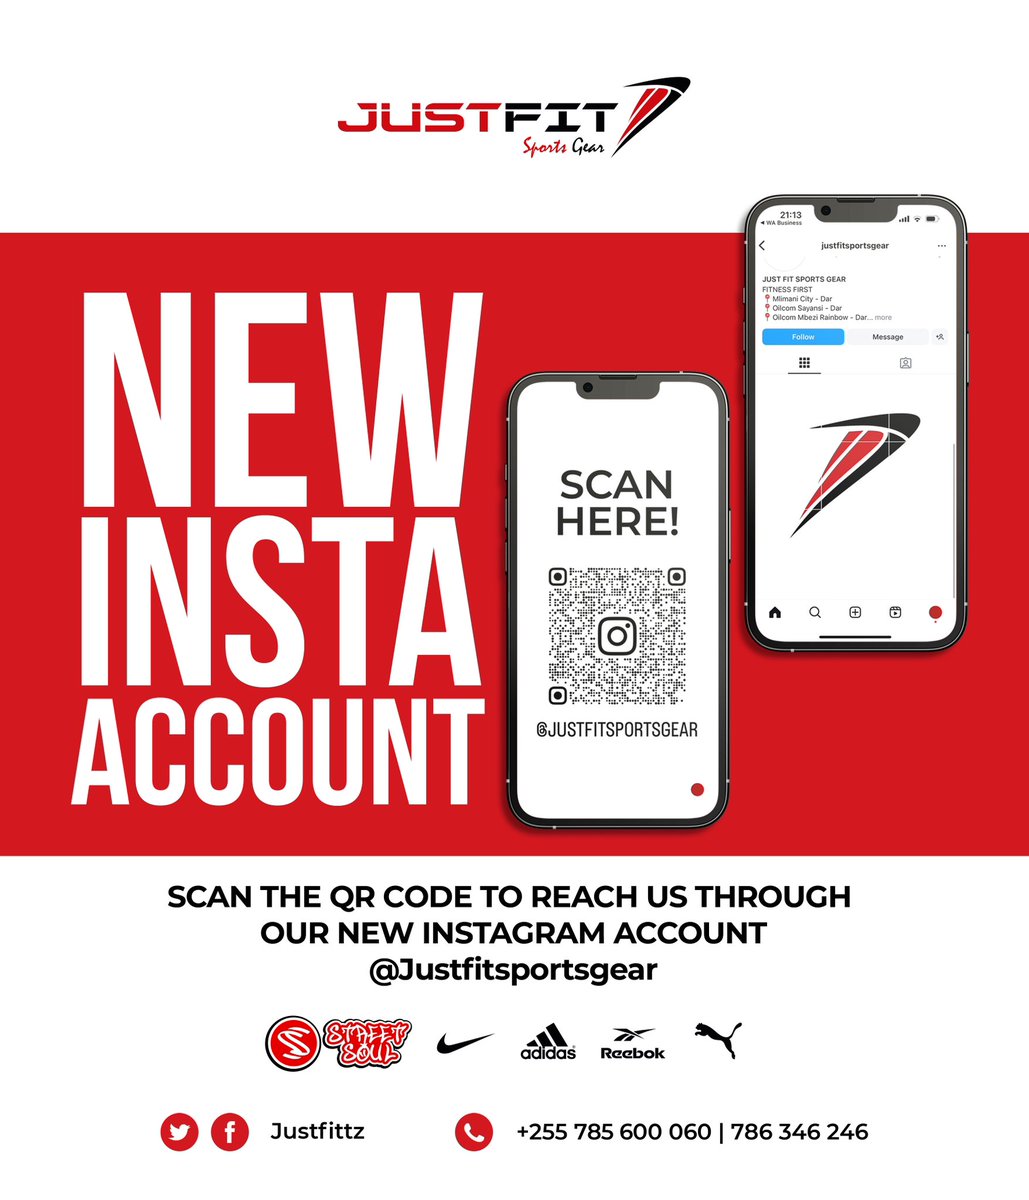 We’re back on Instagram, scan the QR code to land directly on our page.